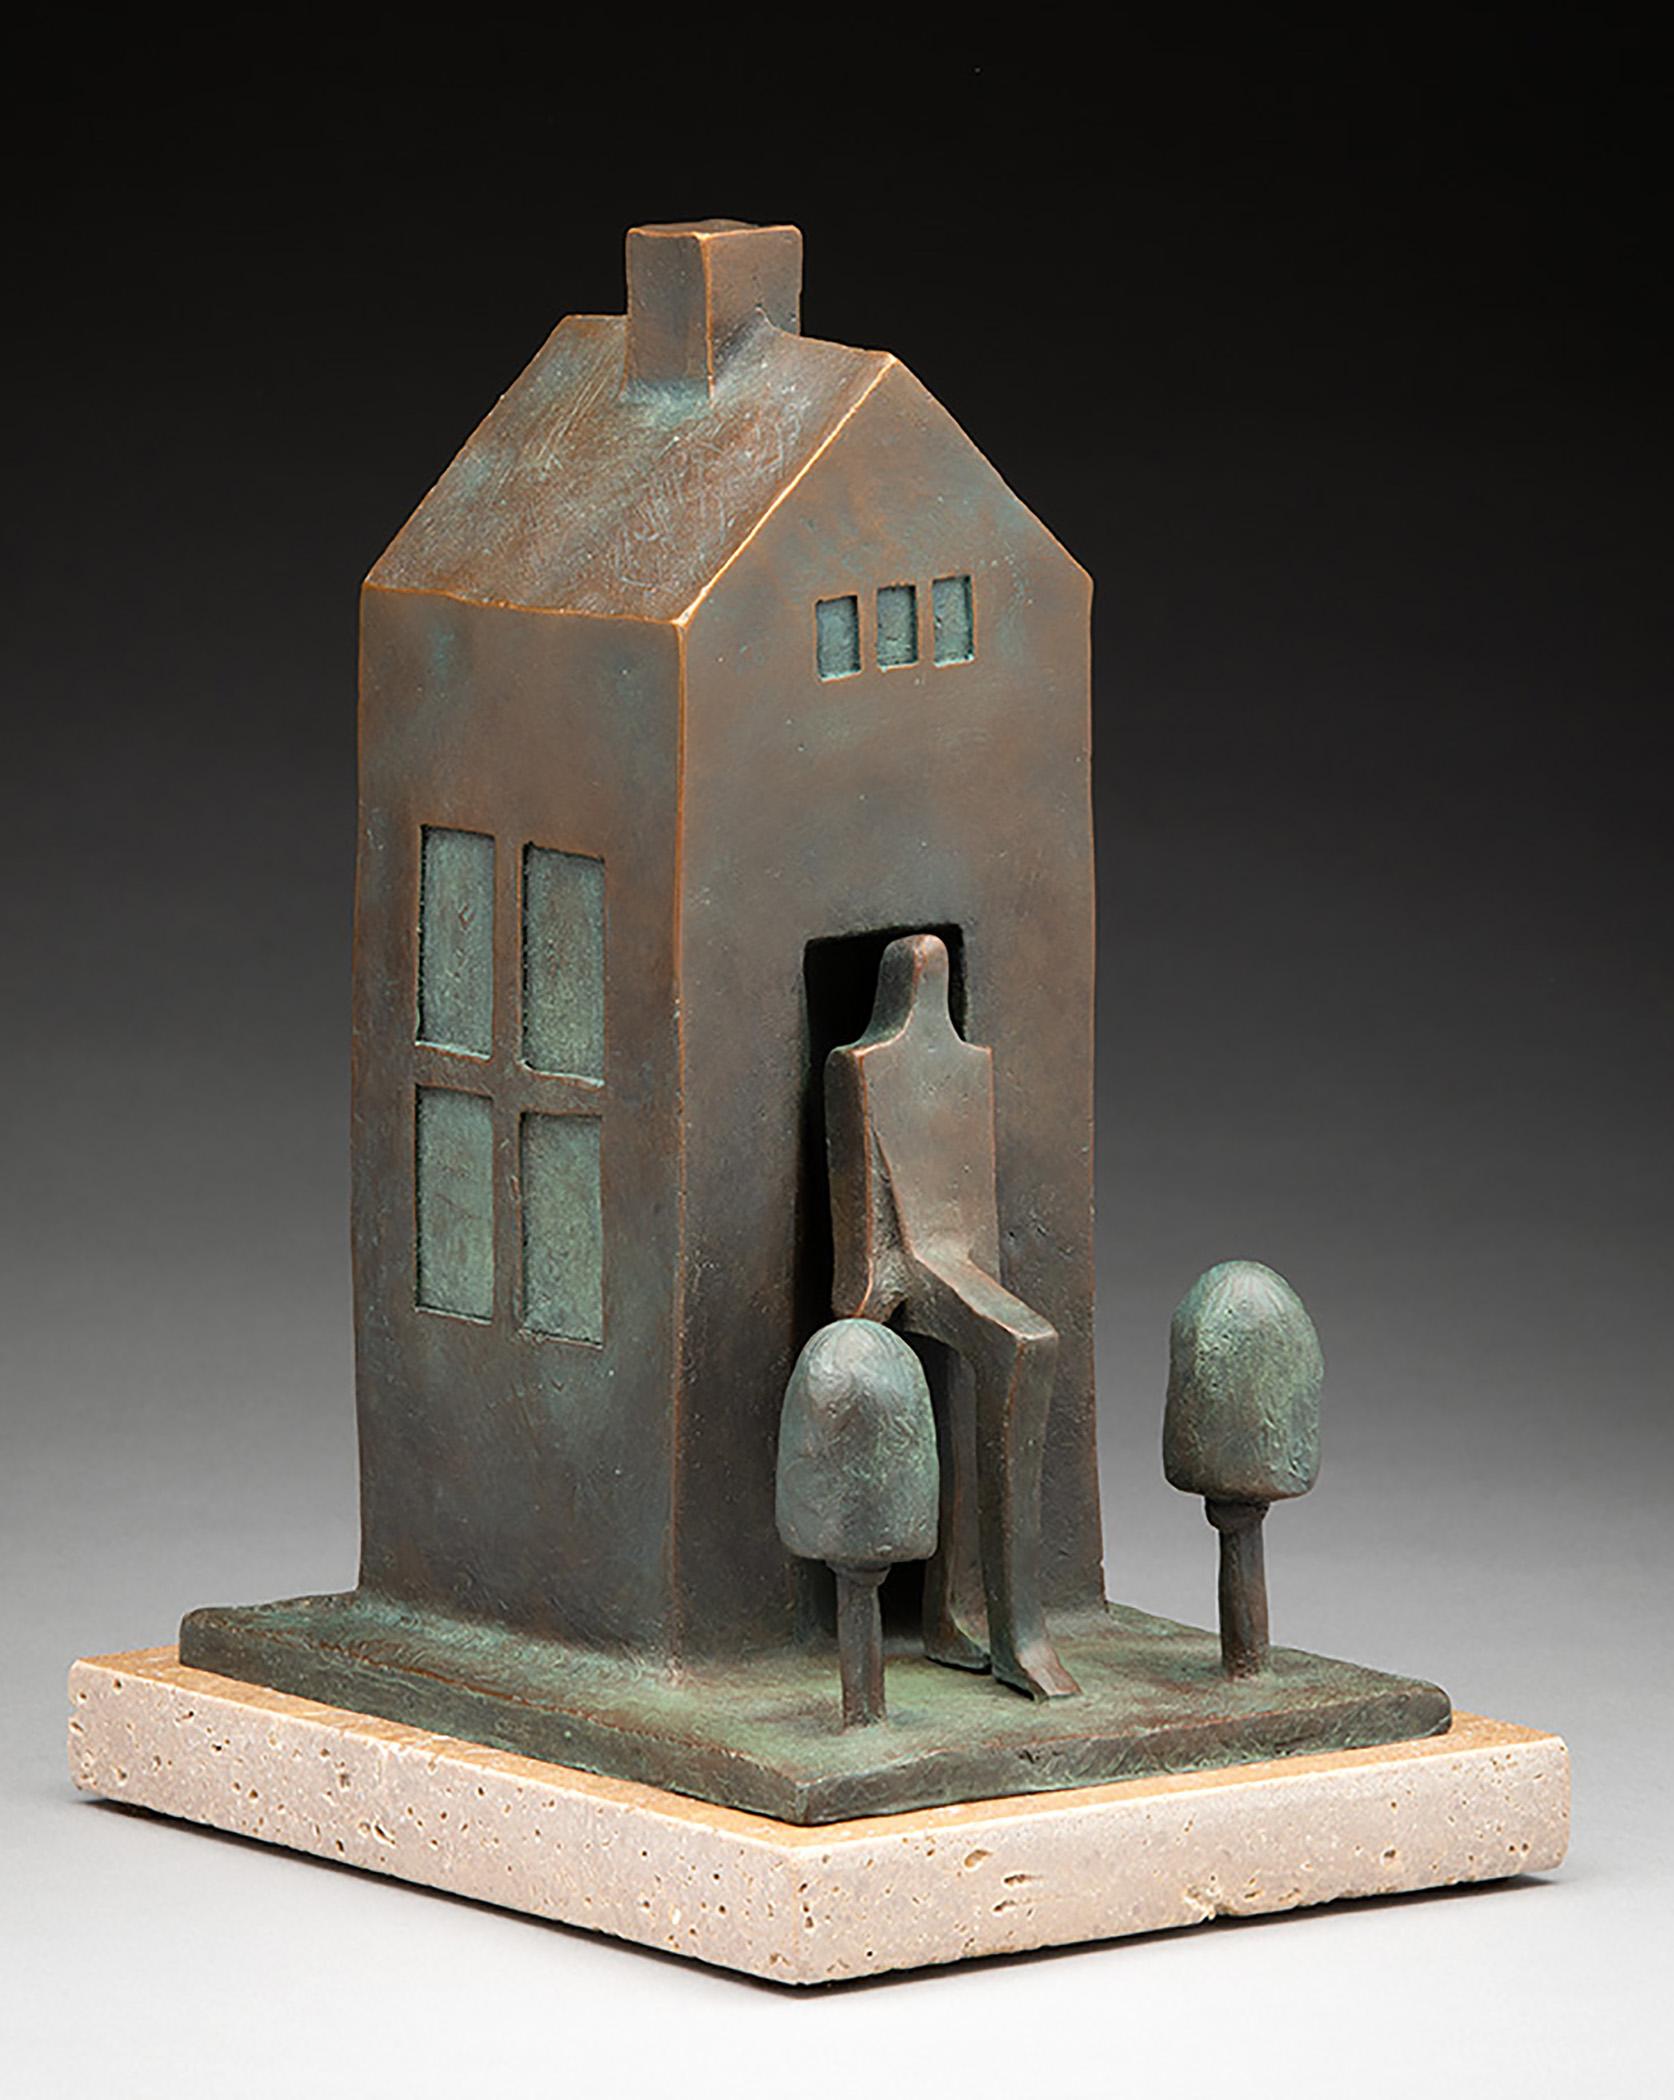 Wayne Salge Abstract Sculpture - "Cabin Fever 1" Bronze cast mini sculpture of a house with trees, Cubism 